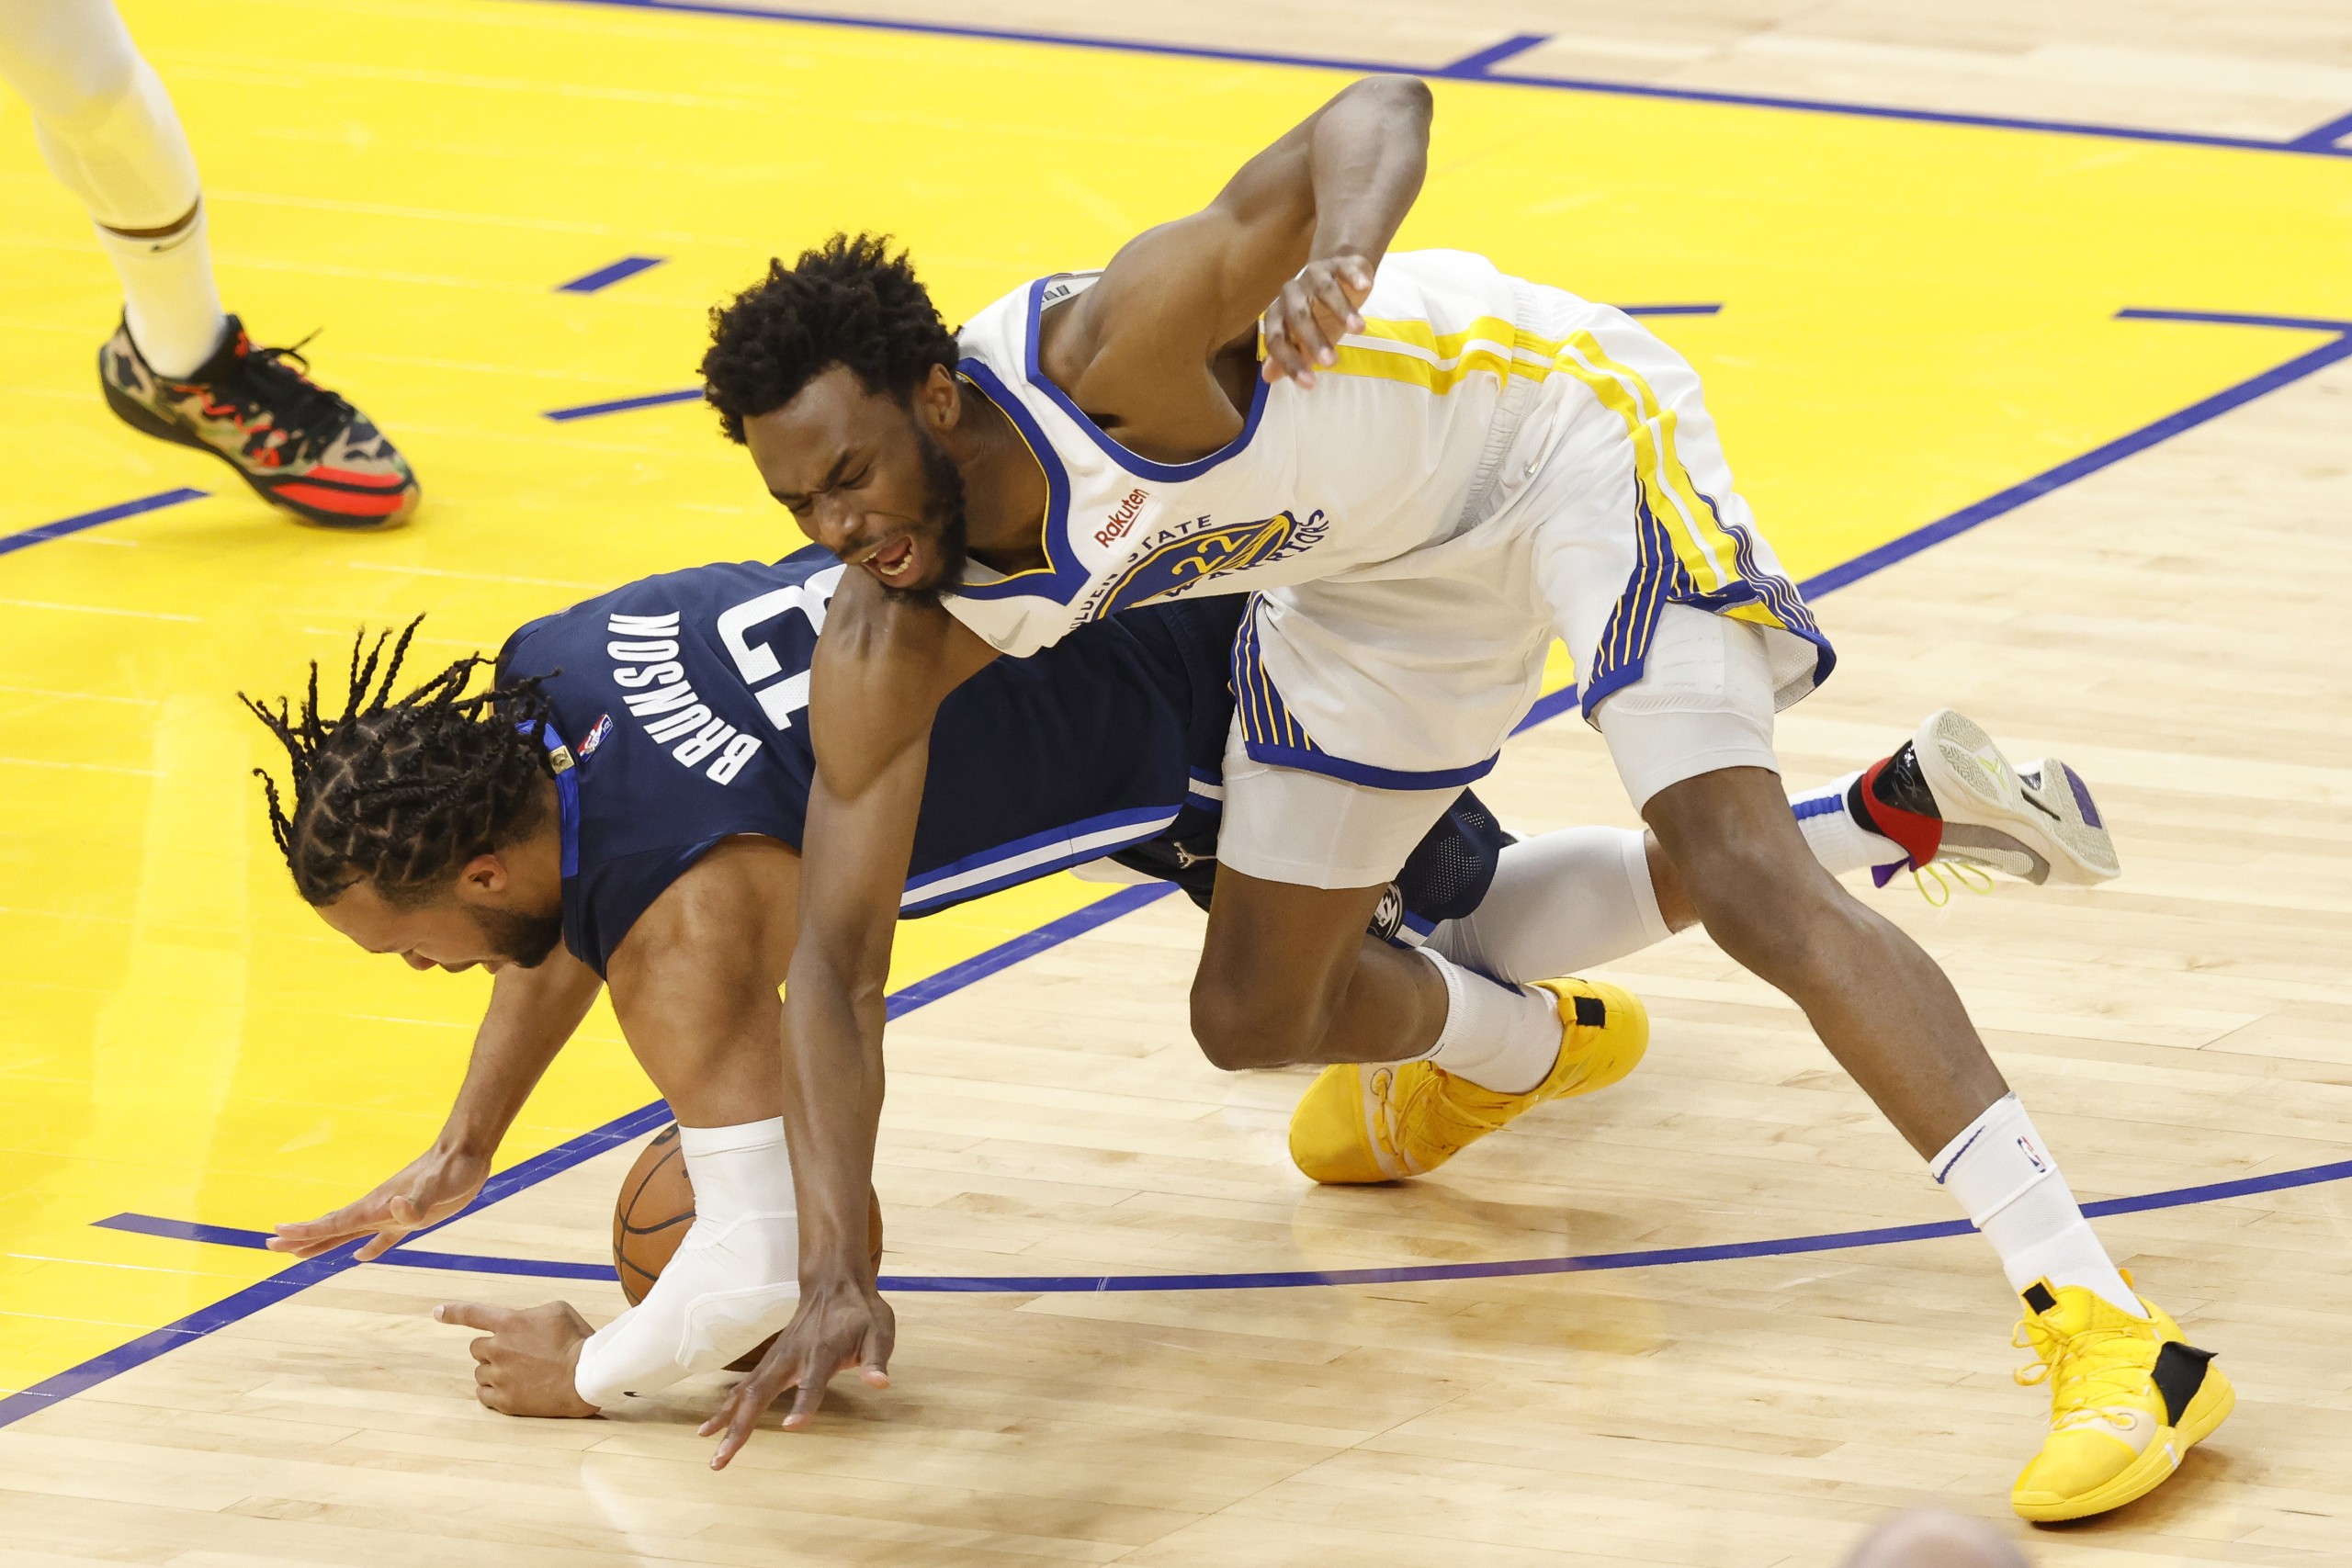 epa09961955 Dallas Mavericks guard Jalen Brunson (L), and Golden State Warriors forward Andrew Wiggins (R), go for a loose ball, during the first half of Game 2 of the NBA Western Conference Finals, between the Golden State Warriors and the Dallas Mavericks at Chase Center in San Francisco, California, USA, 20 May 2022.  EPA/JOHN G. MABANGLO  SHUTTERSTOCK OUT